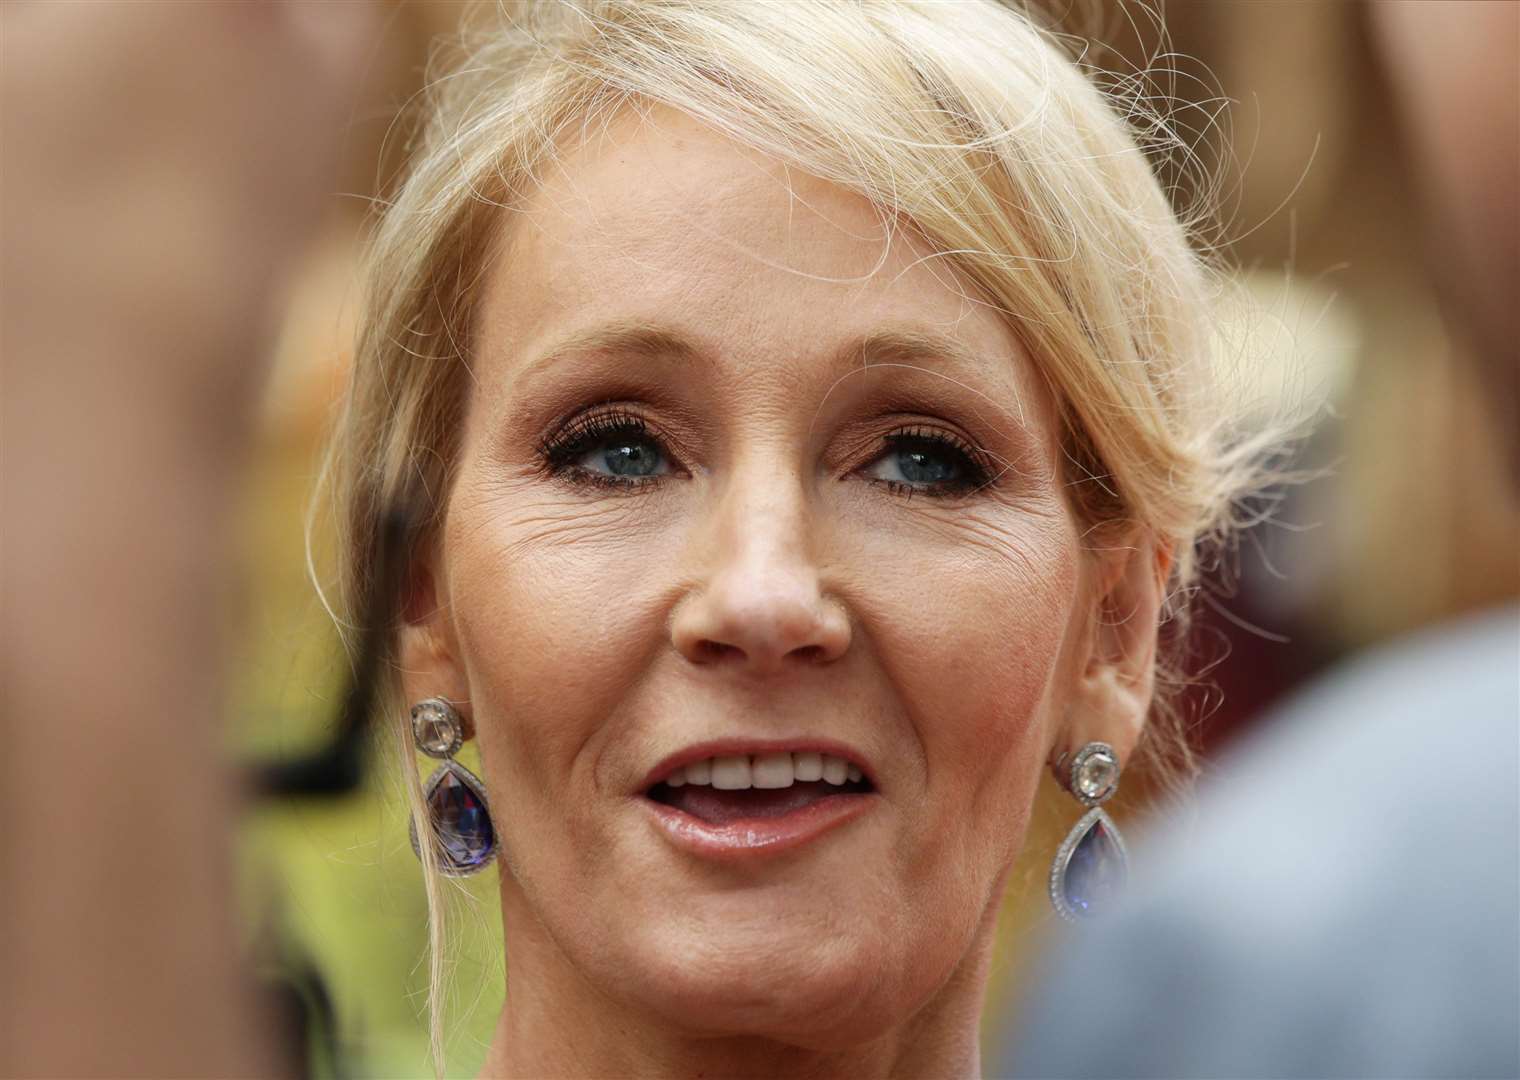 JK Rowling said she will not remove posts which could fall under new hate crime laws (Yui Mok/PA)